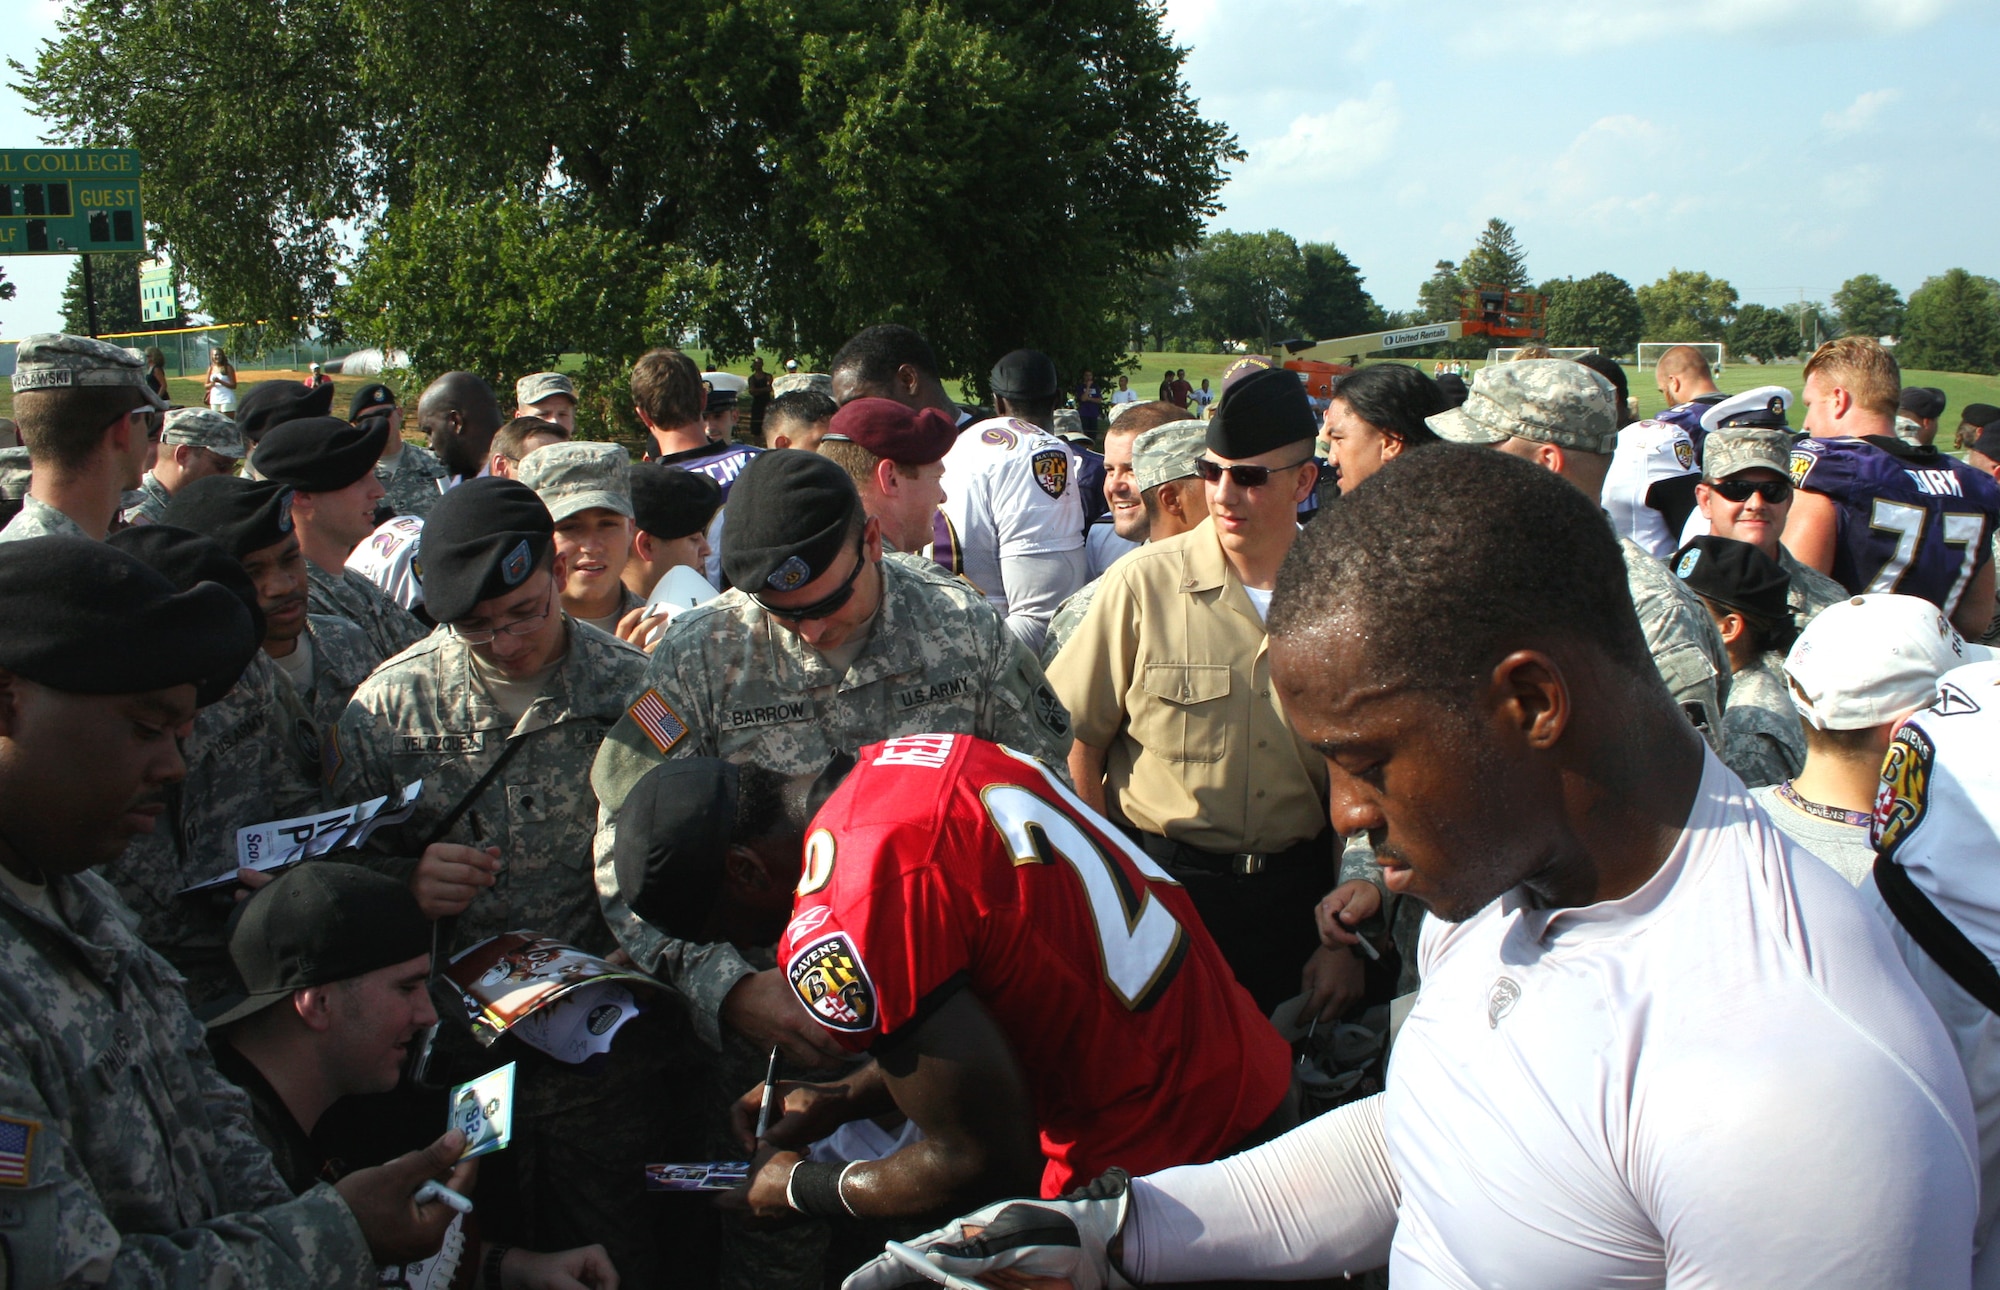 Baltimore Ravens safety, number 20, Ed Reed, and other players, signed autographs and expressed gratitude to the members of the military in attendance during the Military Appreciation Day at Mc Daniel College on August 19, 2009.  In attendance were members of each branch of service and some wounded warriors recovering from injuries received in combat. (U.S. Air Force photo by MSgt. Lou DeVeaux, 175th Wing Public Affairs, Warfield Air National Guard Base, Maryland, United States)   
